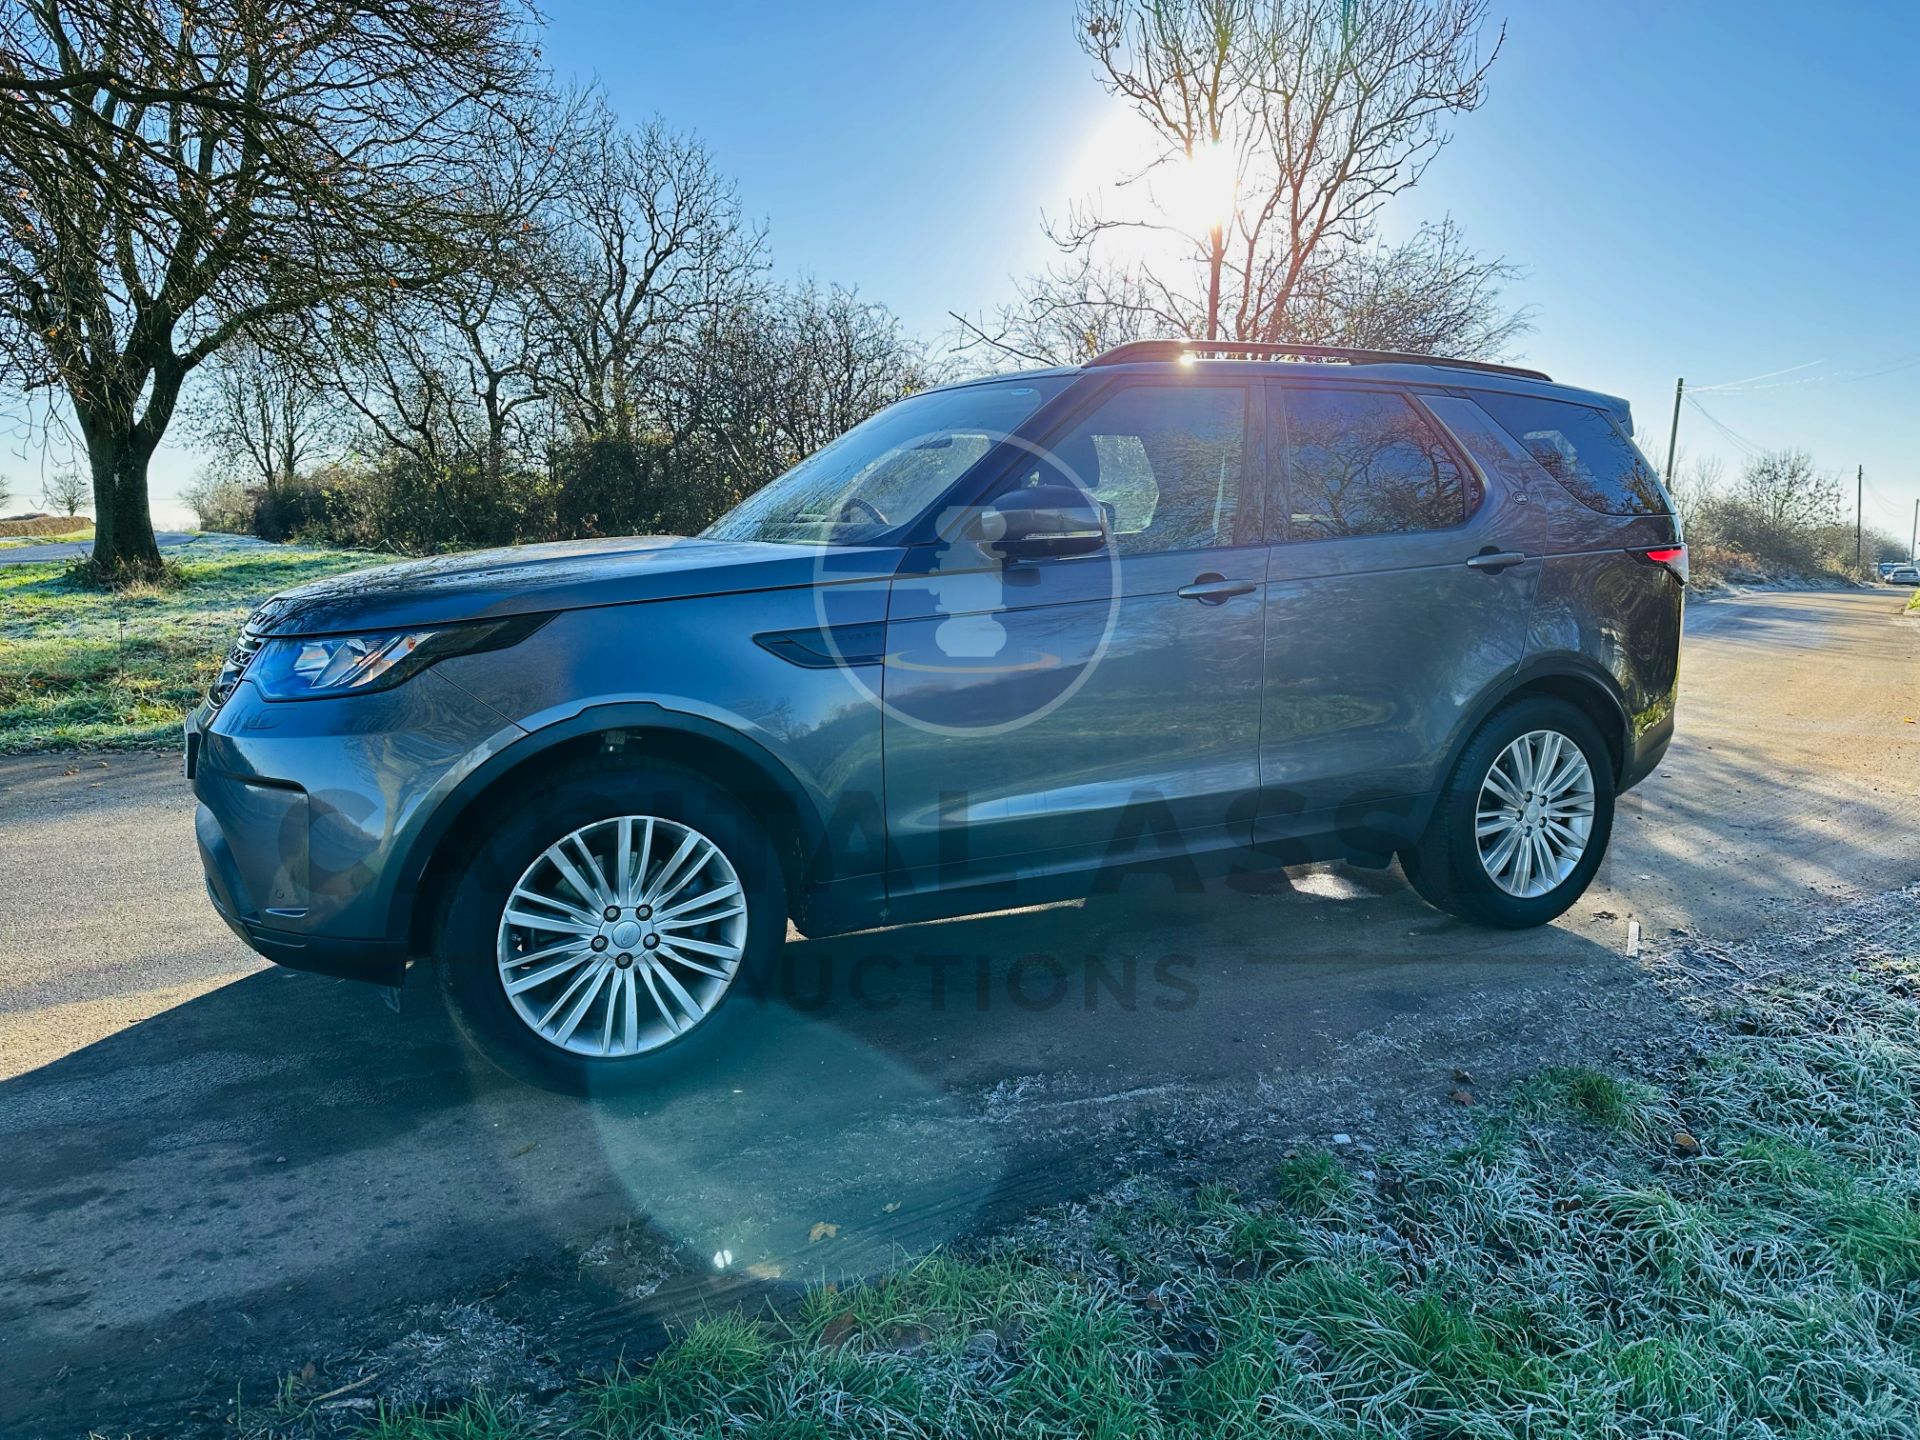 (ON SALE) LAND ROVER DISCOVERY 5 "AUTO DIESEL - 7 SEATER SUV - 2019 MODEL - ONLY 22K MILES FROM NEW - Image 5 of 41